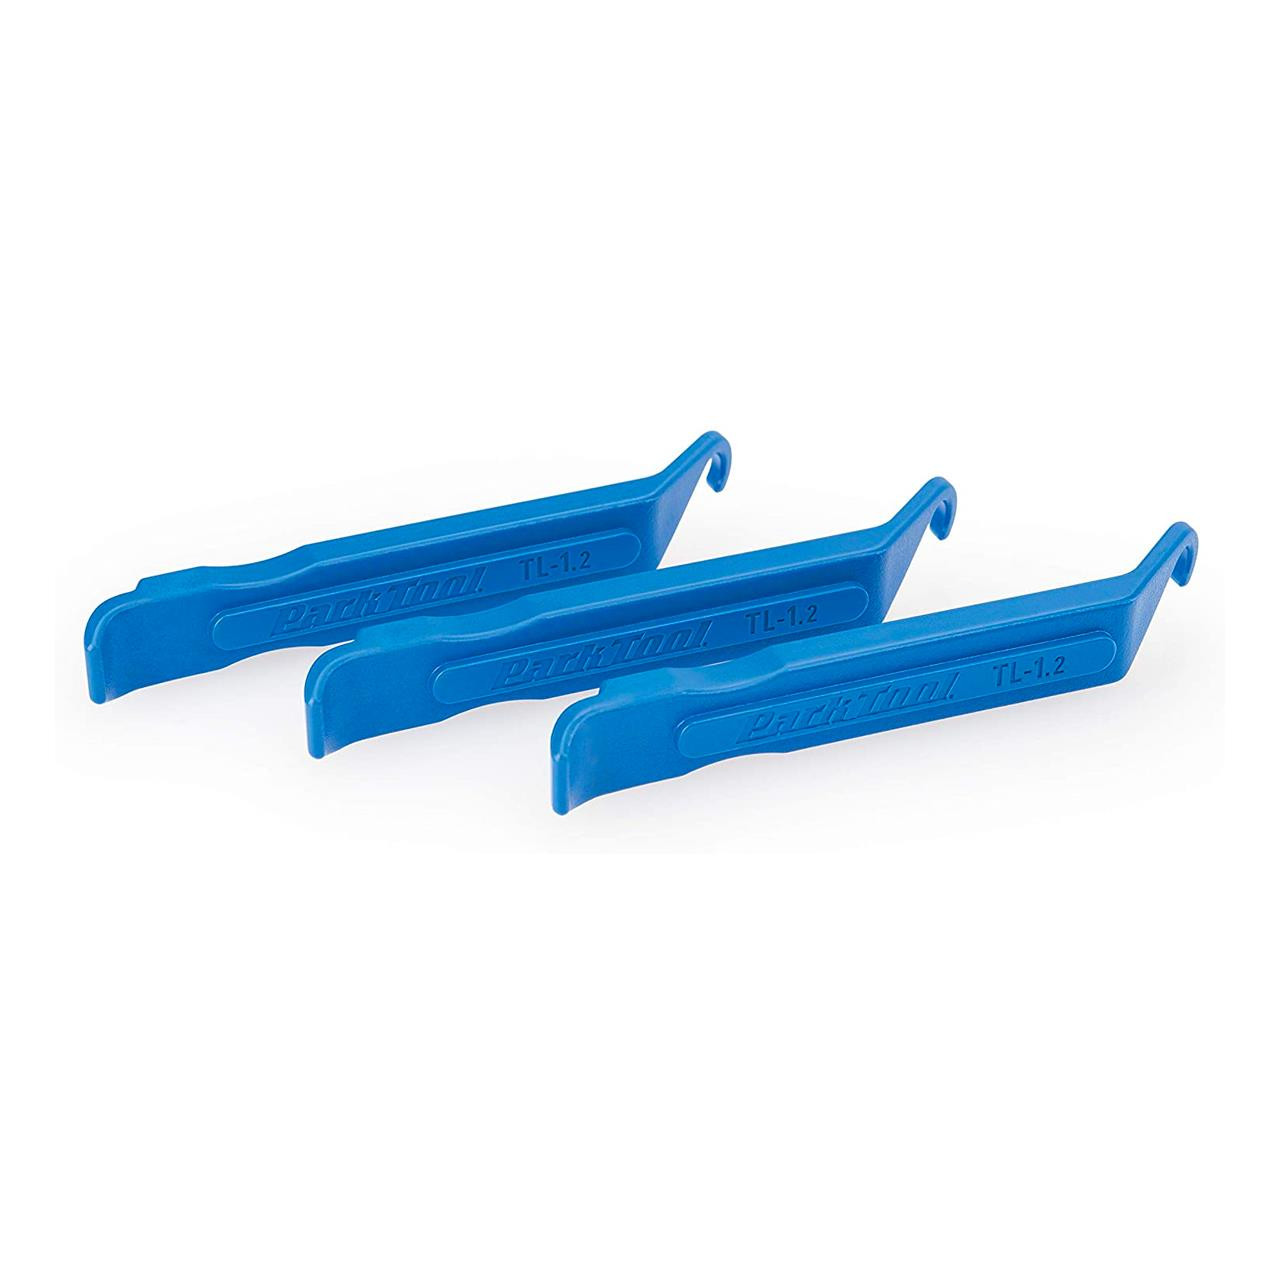 Park Tool TL-1.2 Tyre Levers (Set of 3)